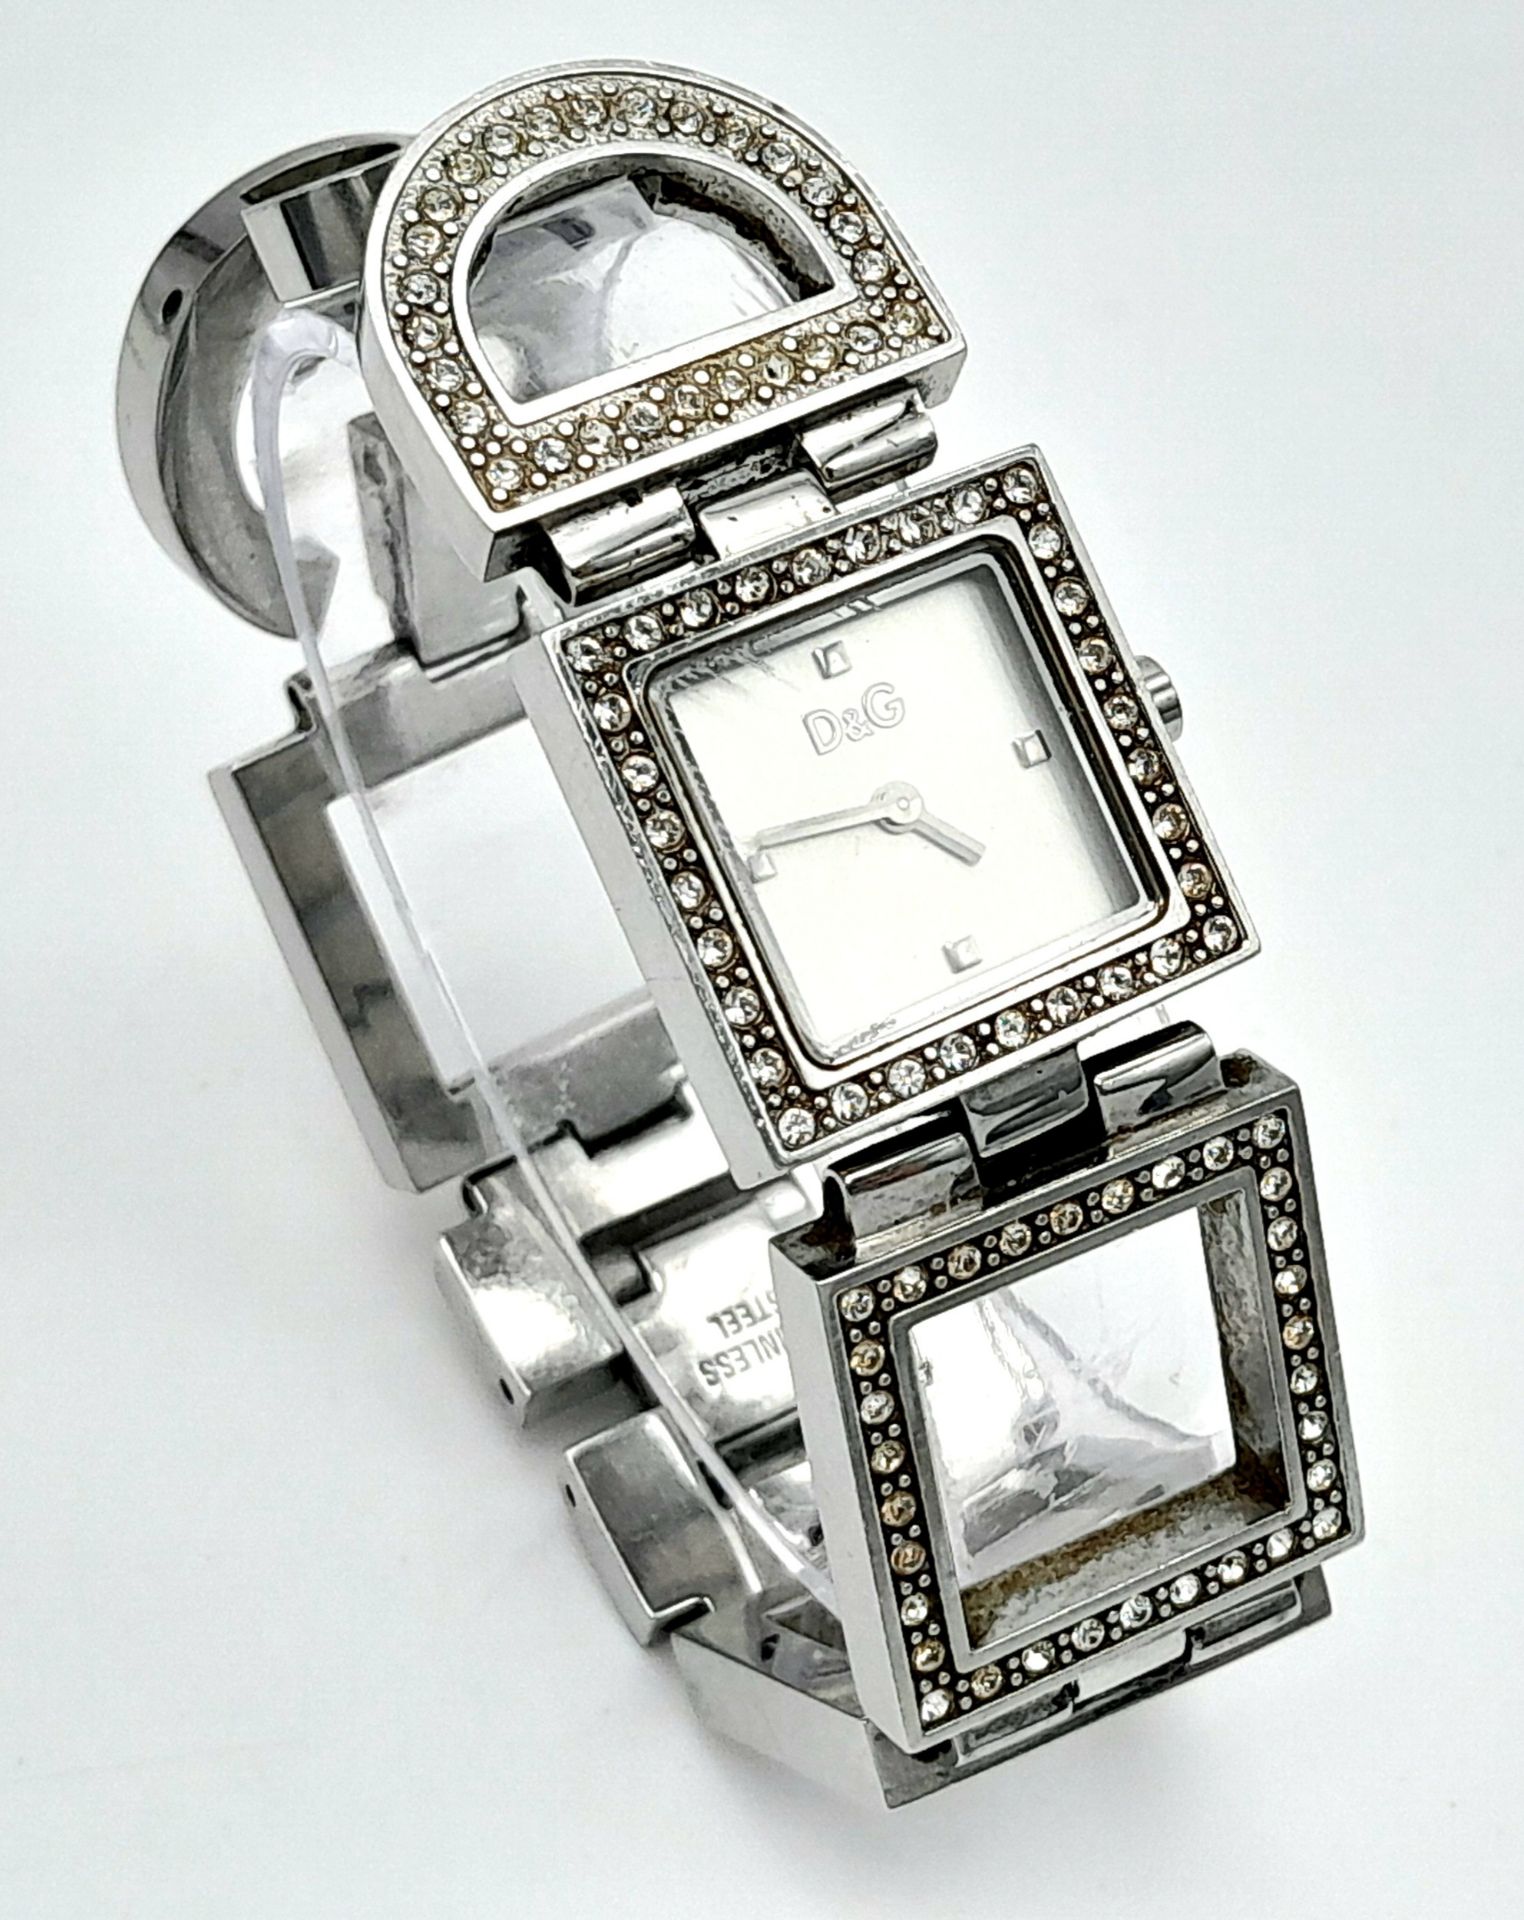 The very iconic ladies DOLCE & GABBANA watch with the D & G logo studded in Swarovski crystals. - Image 3 of 7